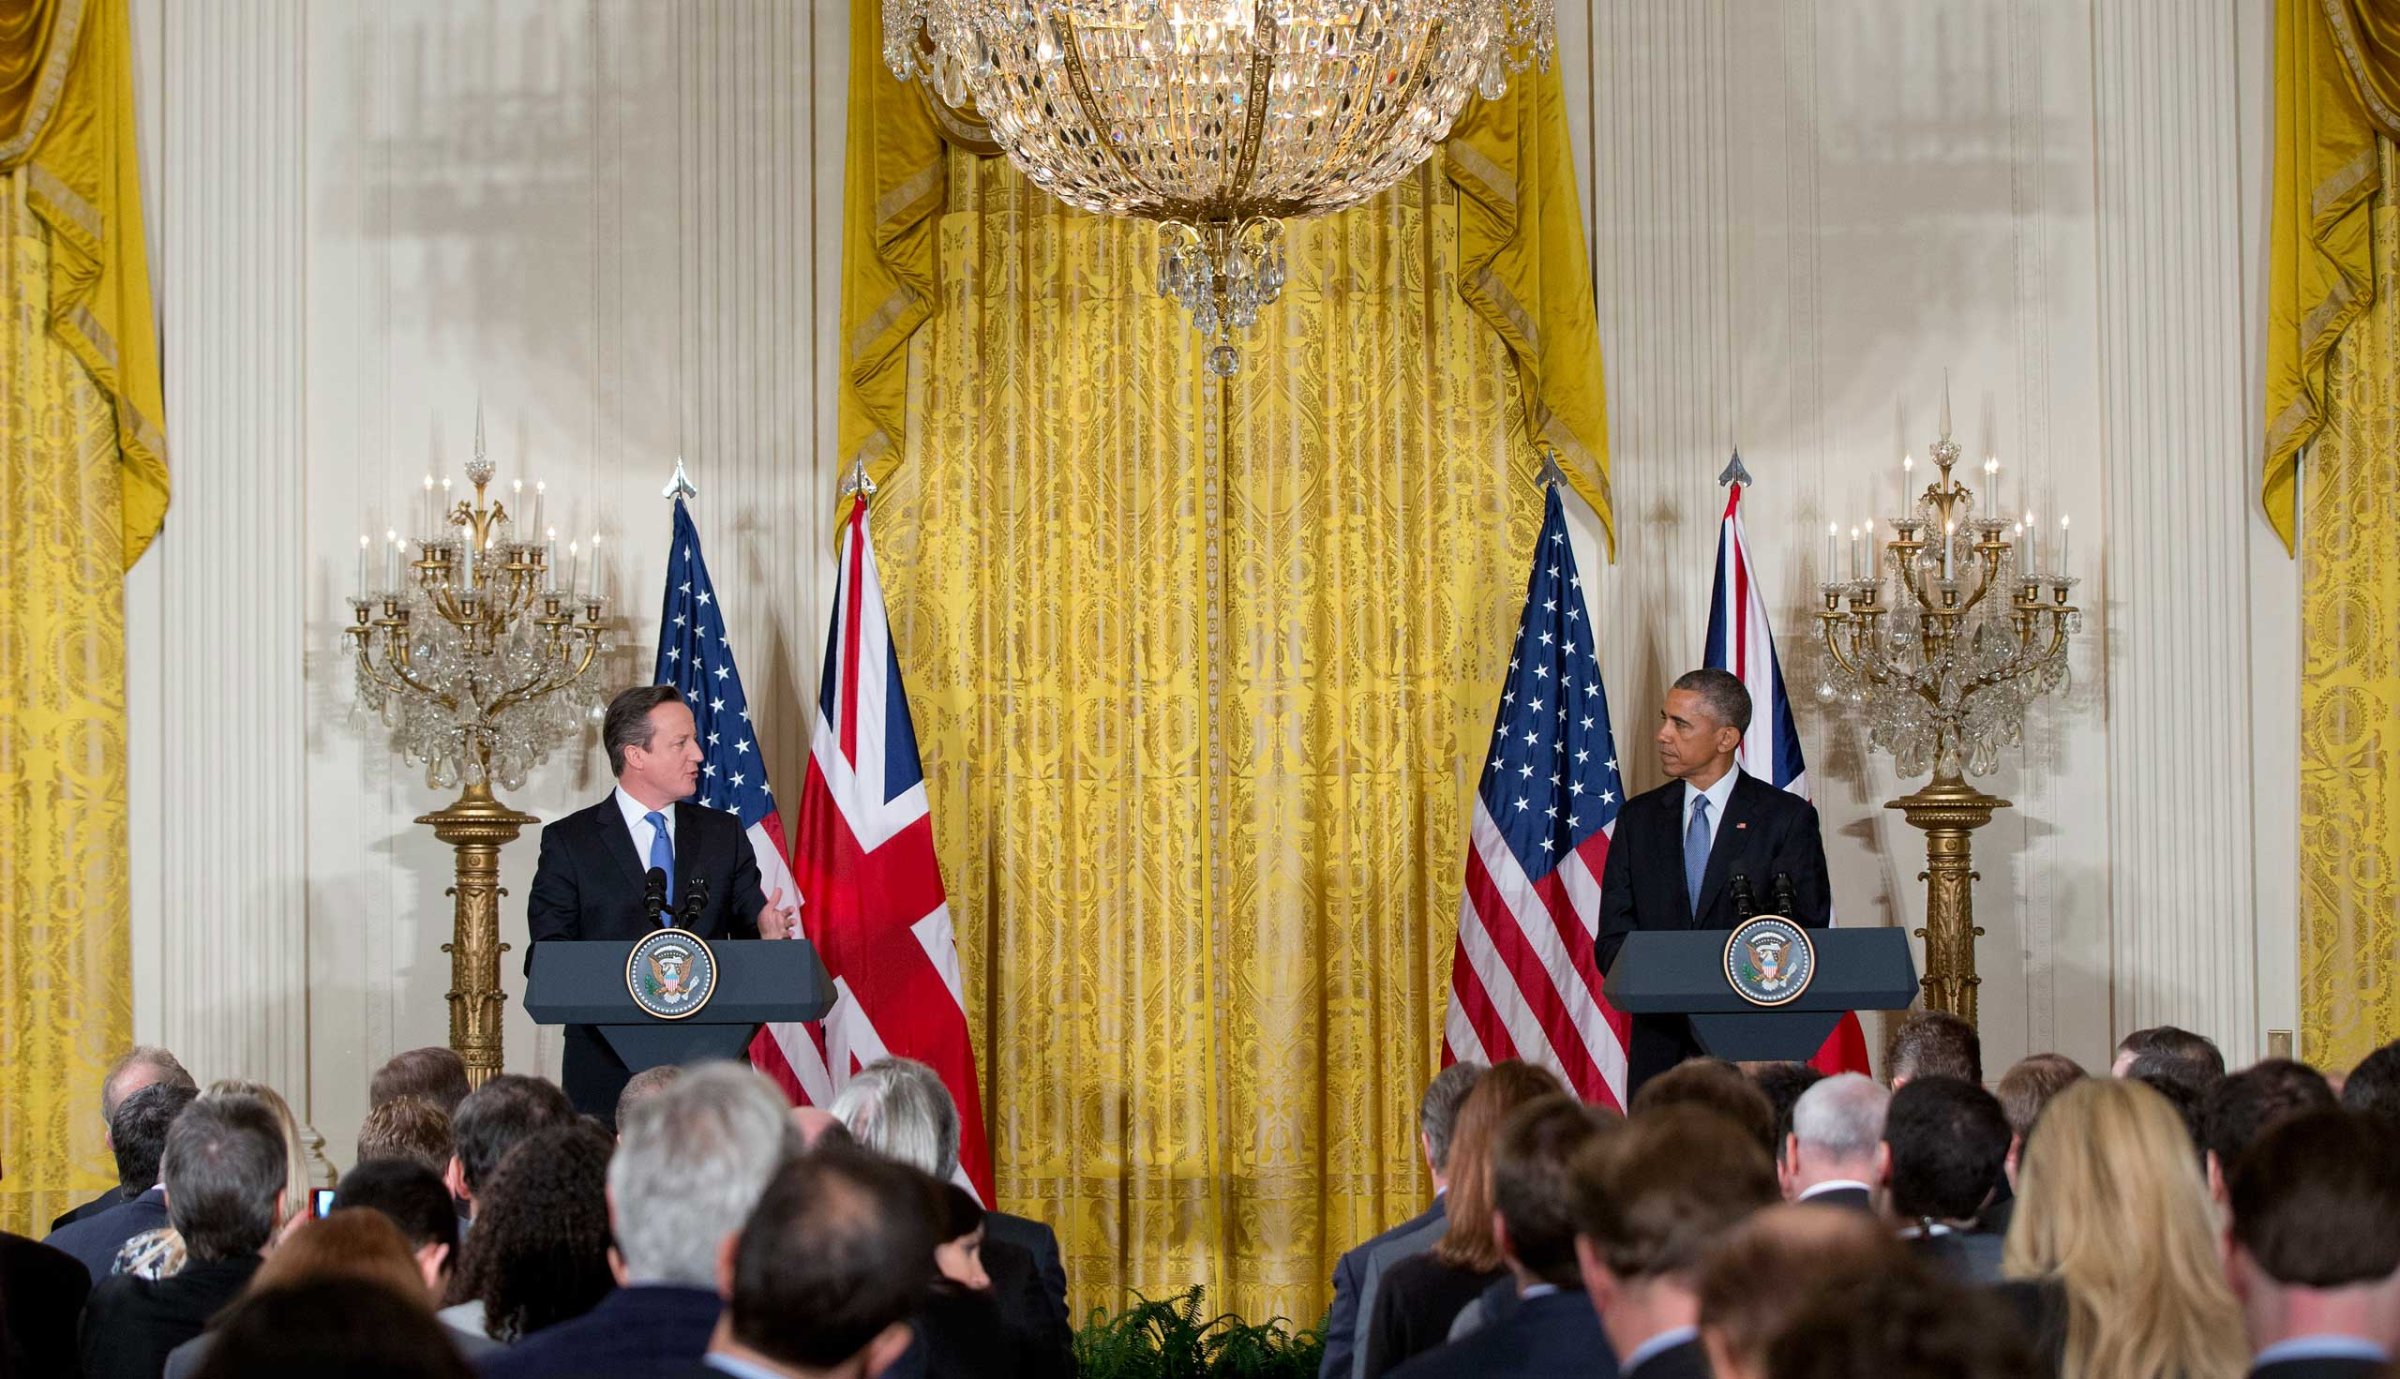 President Barack Obama and British Prime Minister David Cameron hold a joint news conference in the East Room of the White House in Washington on Jan. 16, 2015.